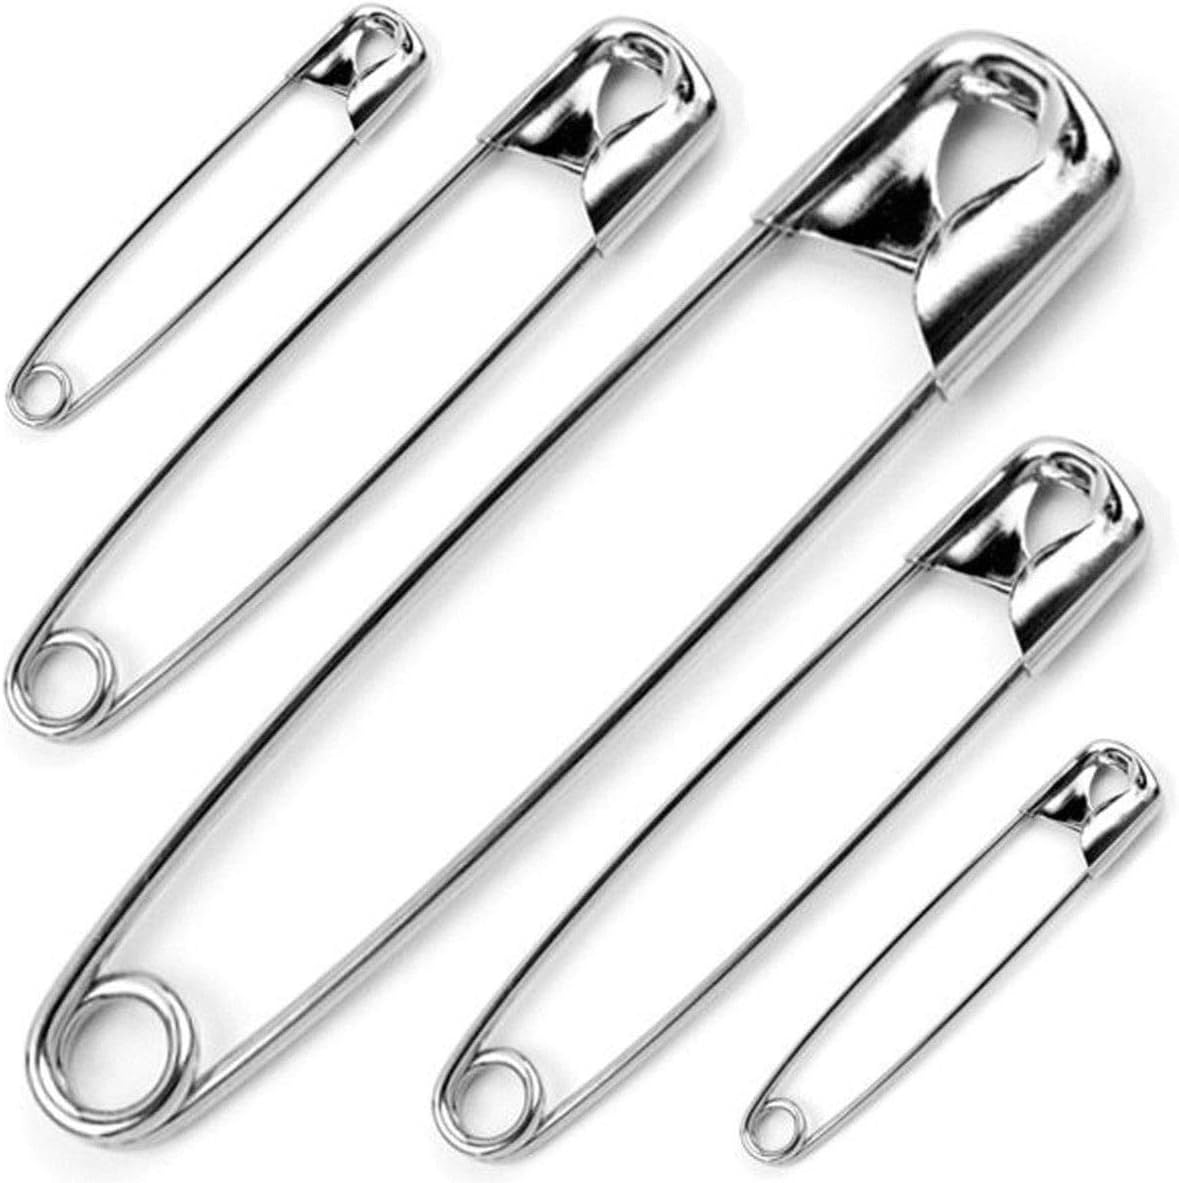 Safety pin being worn on clothing.